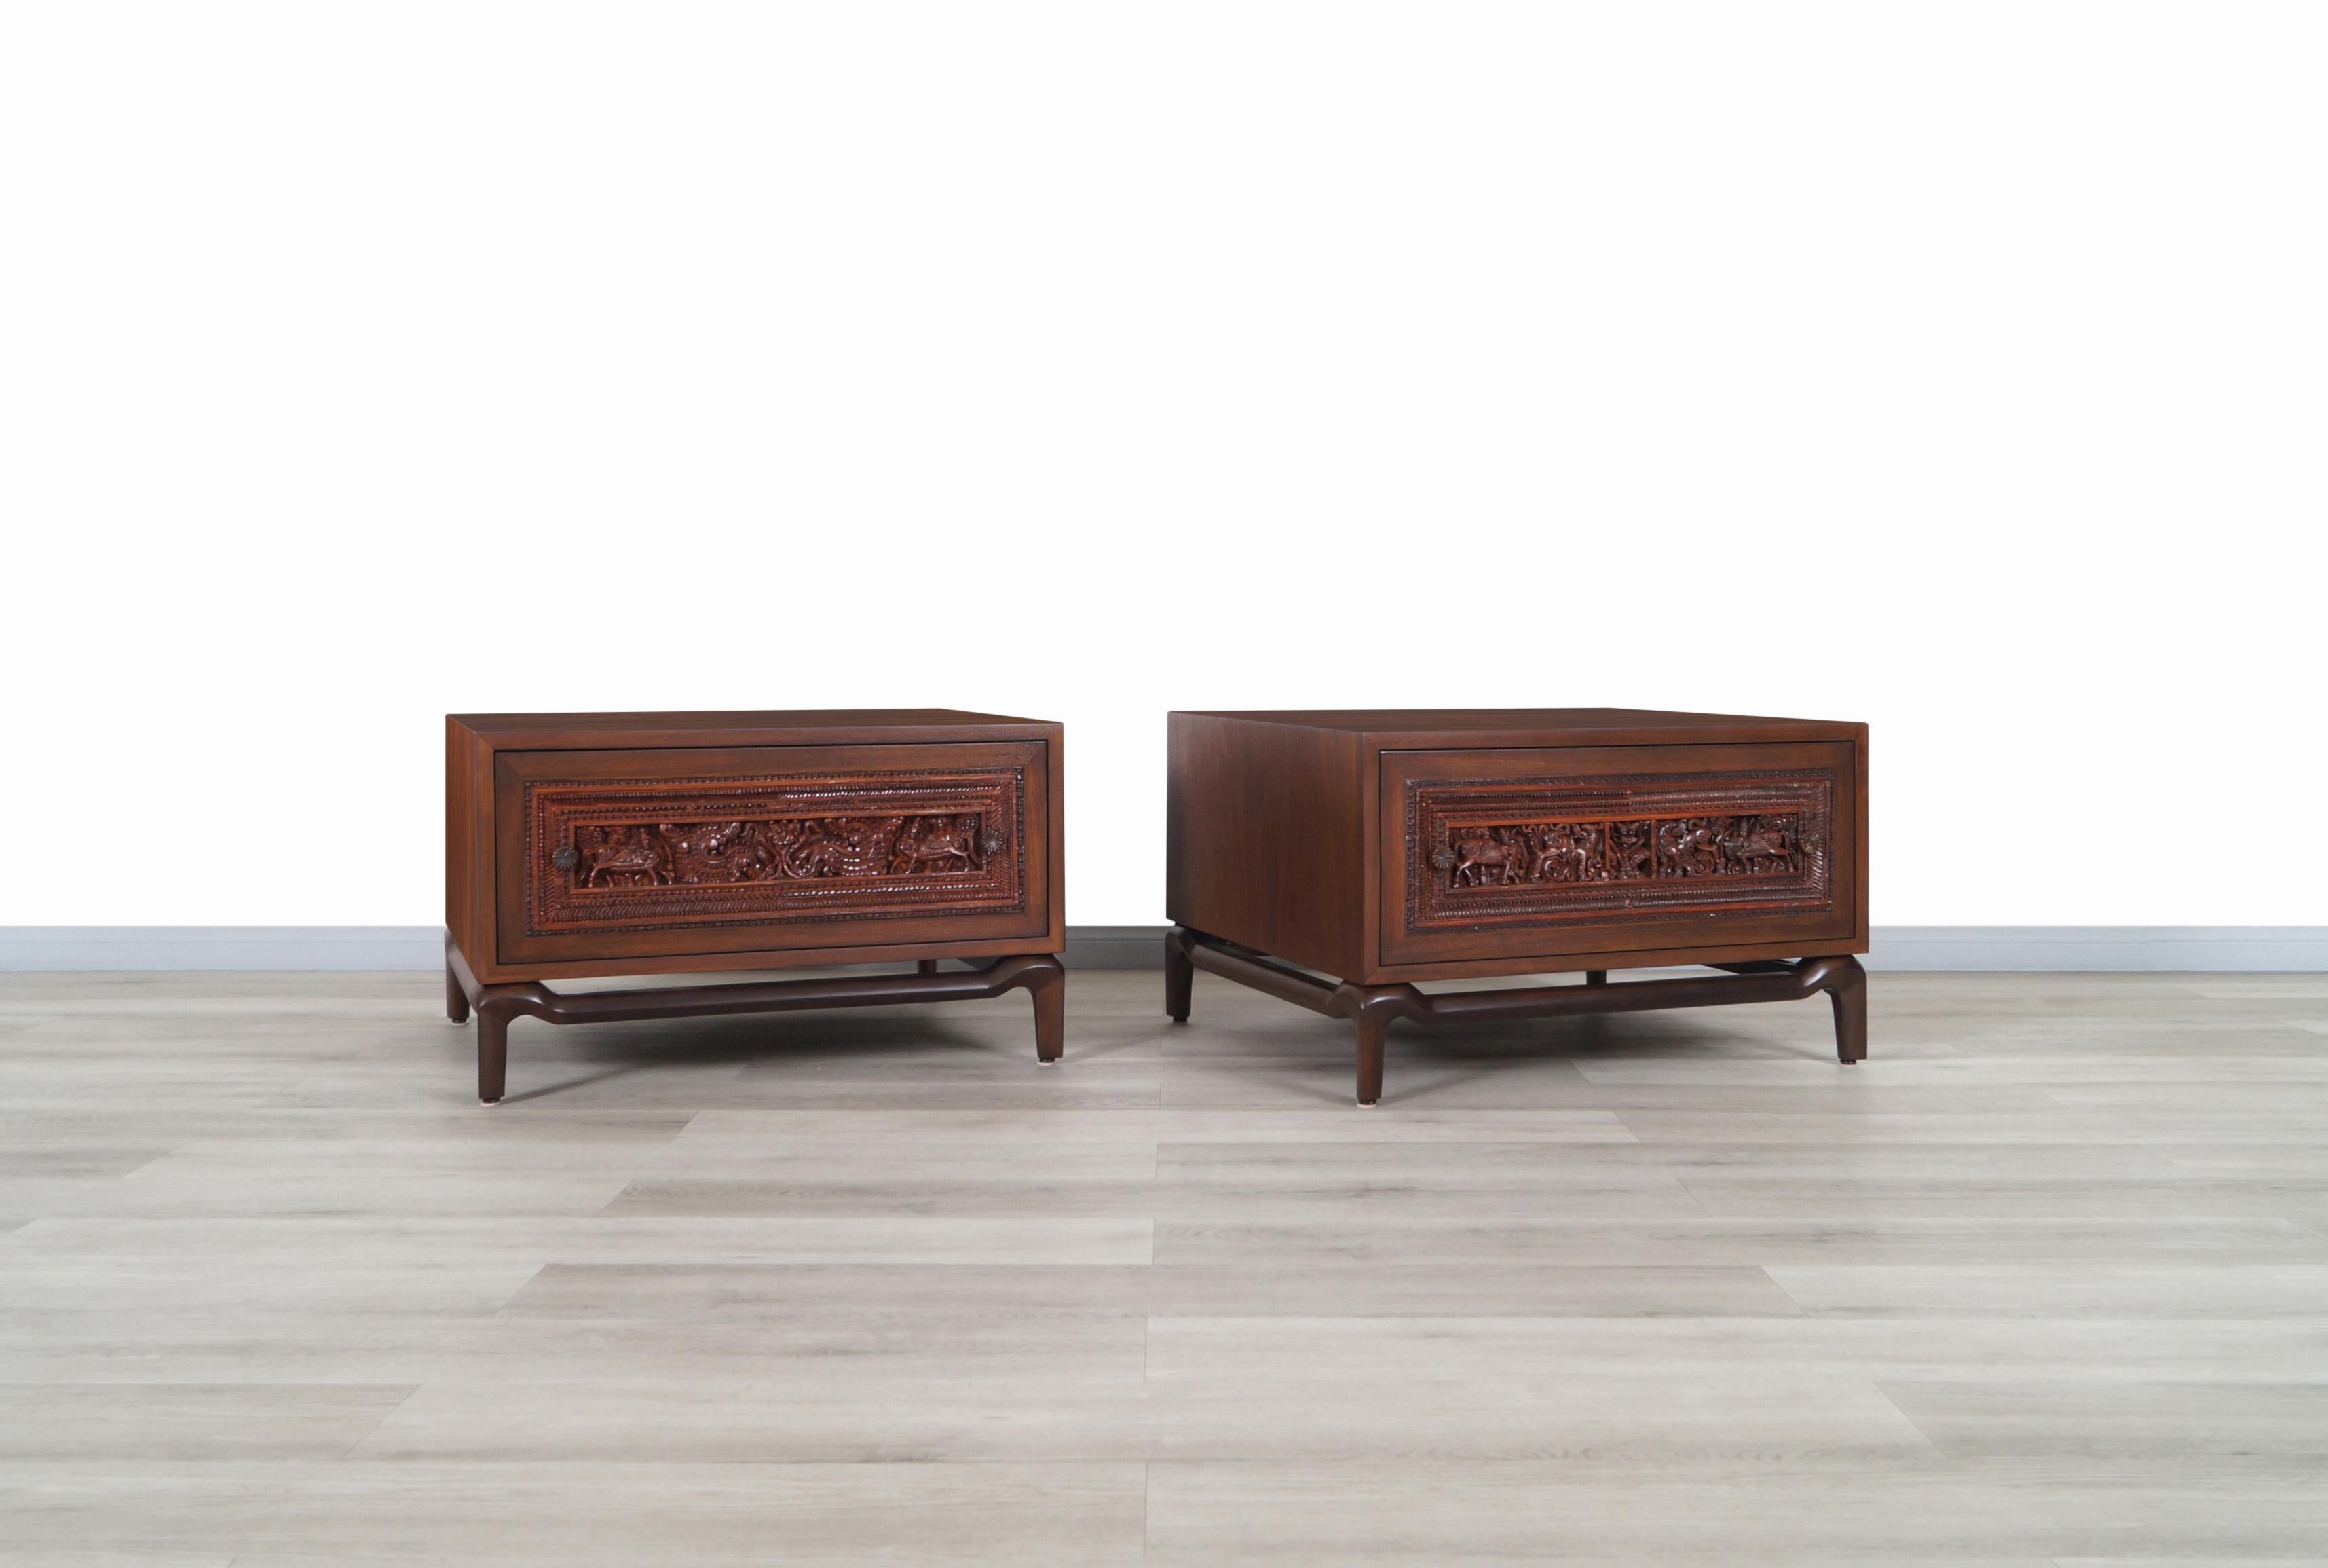 Gorgeous vintage walnut nightstands designed by Maurice Bailey for Monteverdi Young in United States, circa 1960s. Fantastic pair of nightstands made of walnut that reveals its exquisite lines through the case. Each case sits on a sculptural base